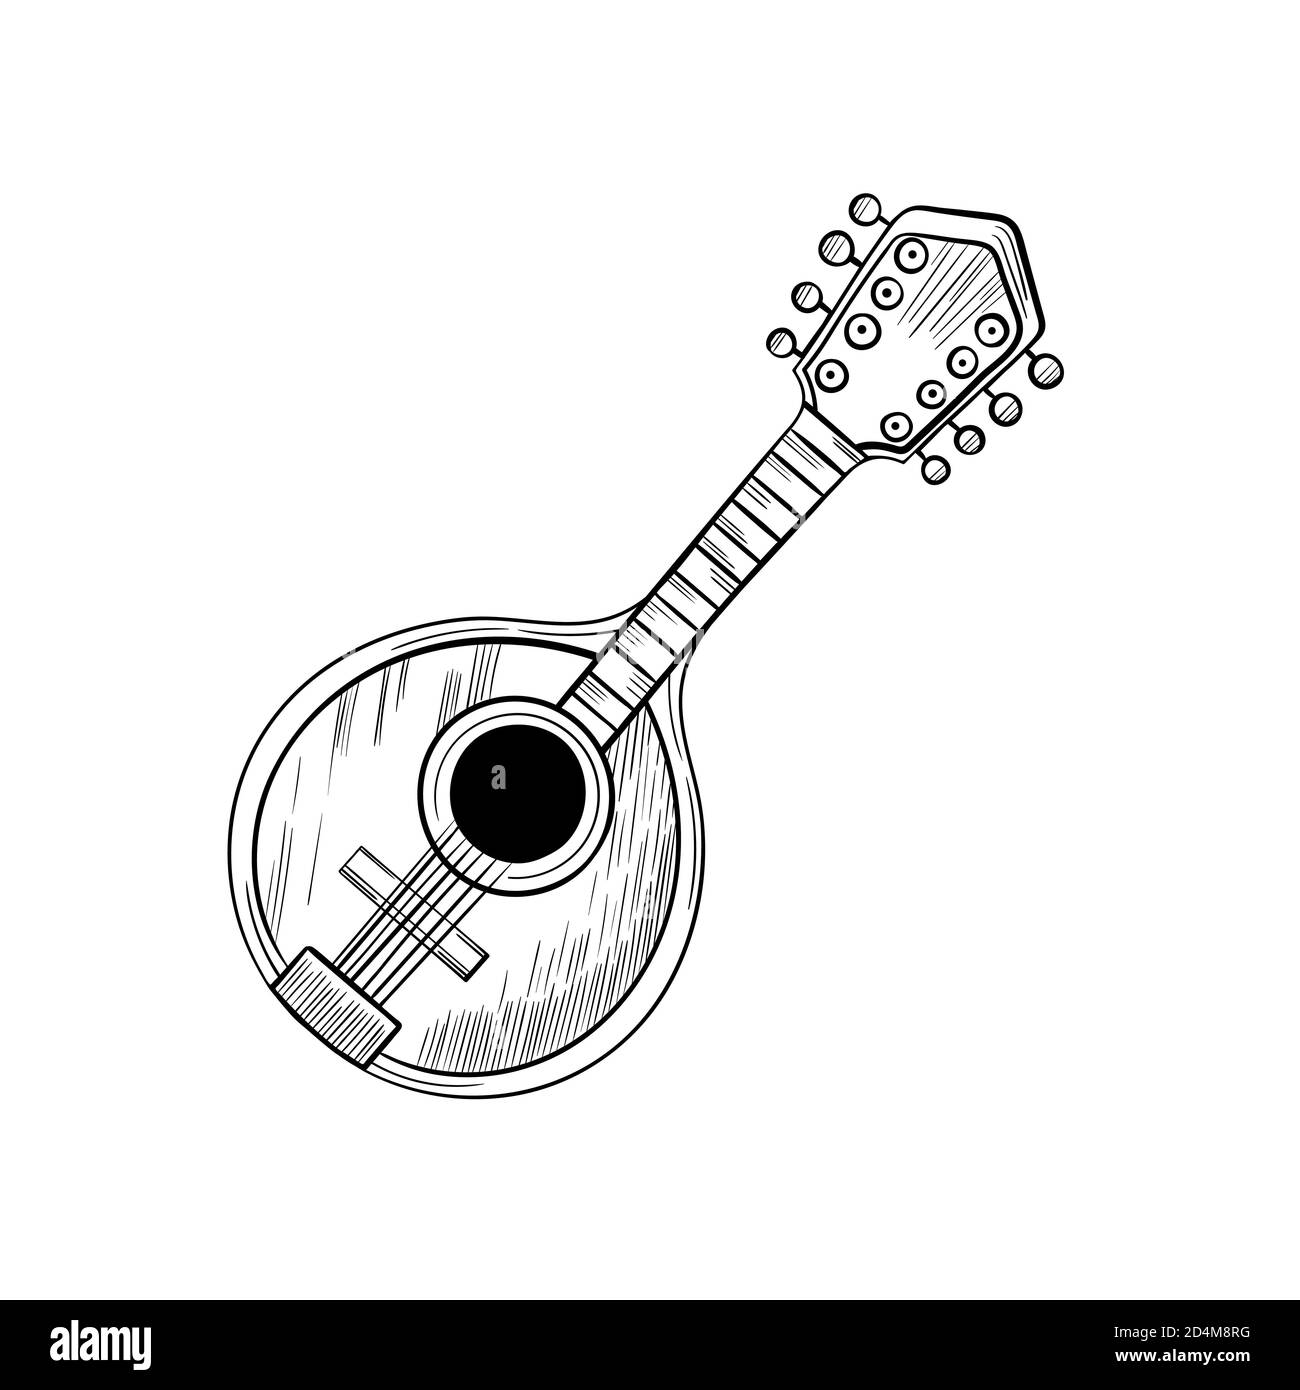 Mandolin stylized graphic arts hand drawn vector sketch icon isolated on background Stock Vector